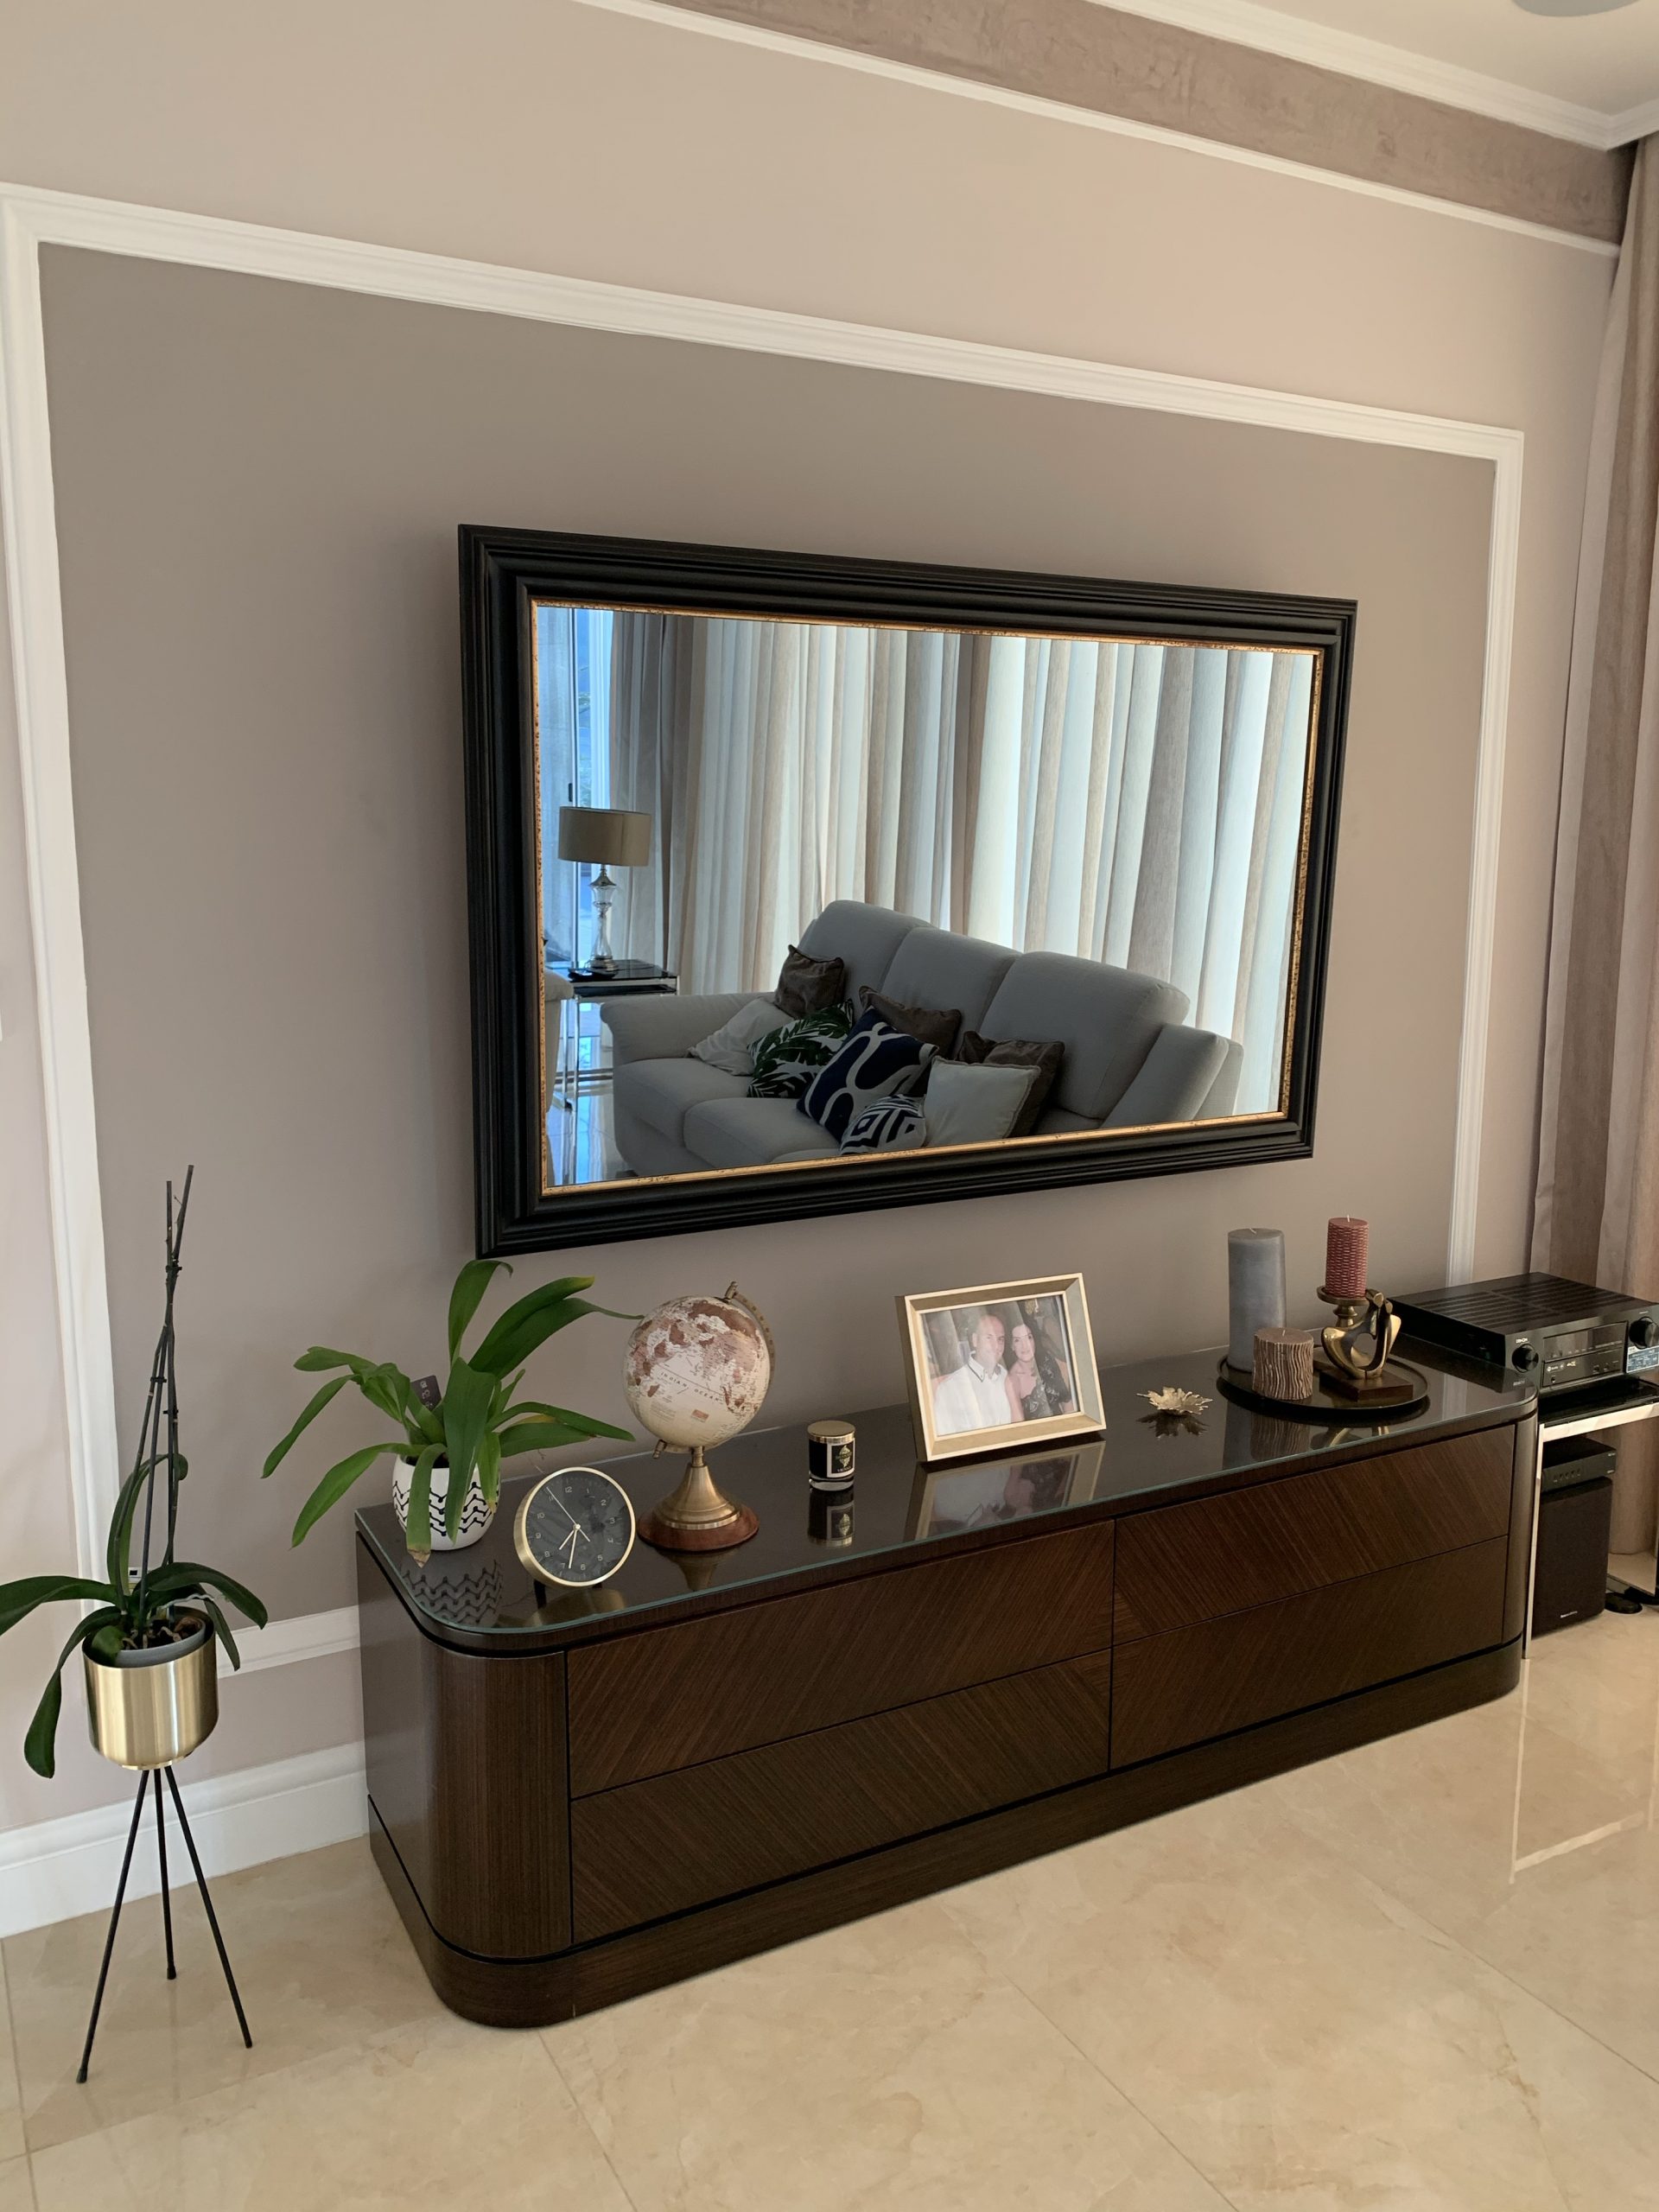 2023 Model 50 Inch Samsung Neo QLED QN90 Framed Mirror TV with any frame.